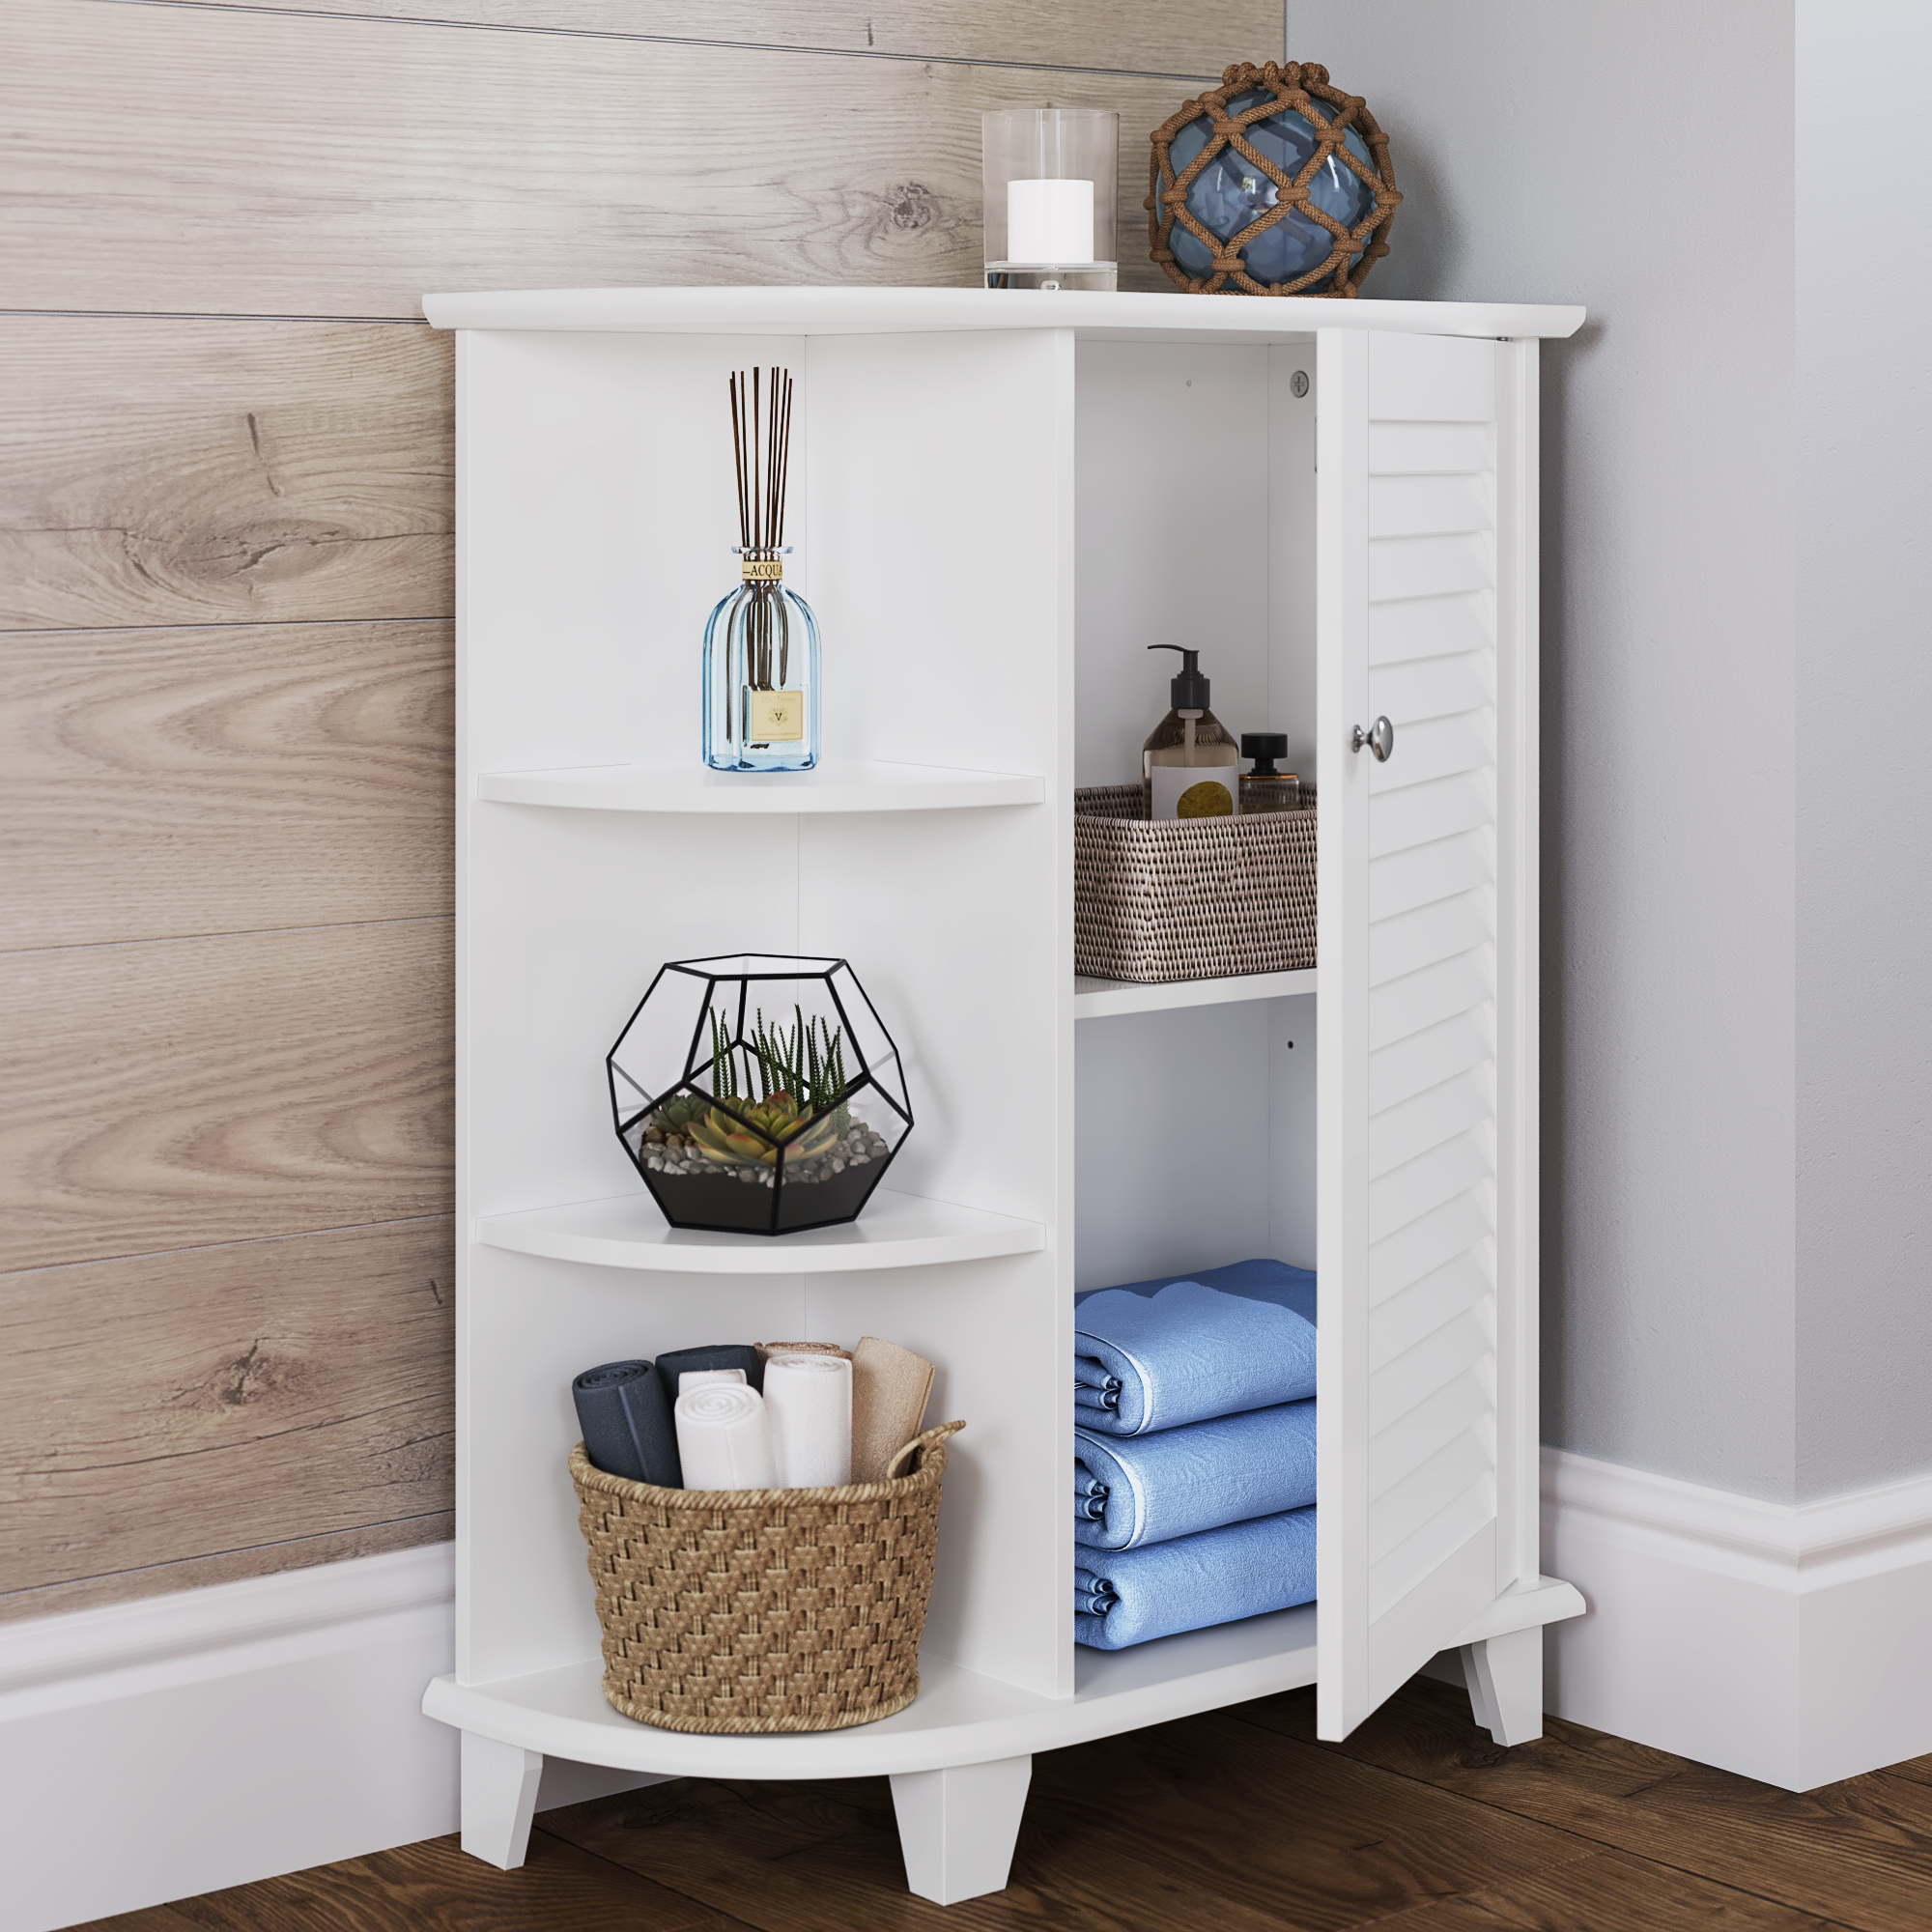 FAMIROSA Floor Cabinet Bathroom Cabinet with 2 Cabinet and Shelves Chipboard Tall Storage Organizer Linen Tower Display Stand White 12.6x10x74.8